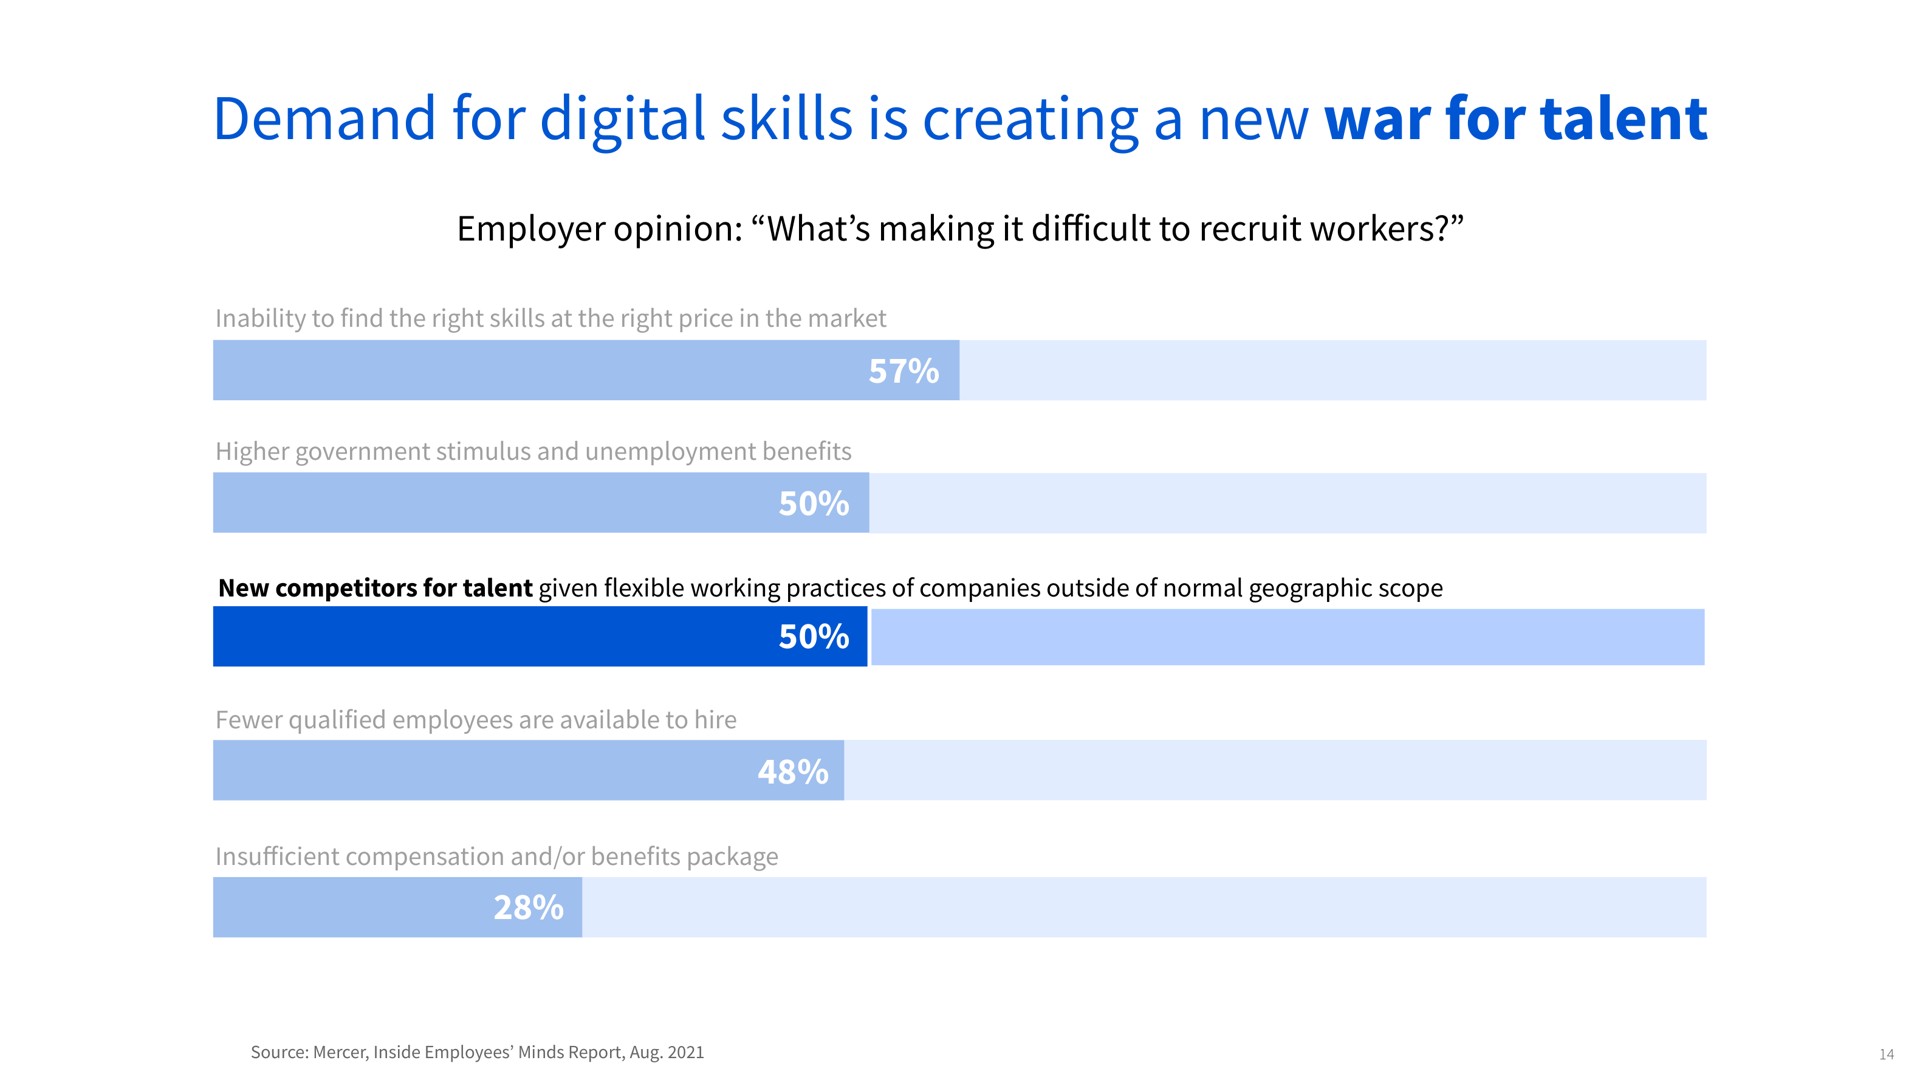 demand for digital skills is creating a new war for talent employer opinion what making it to recruit workers inability to find the right skills at the right price in the market higher government stimulus and unemployment benefits new competitors for talent given flexible working practices of companies outside of normal geographic scope new competitors for talent given flexible working practices of companies outside of normal geographic scope qualified employees are available to hire compensation and or benefits package | Coursera